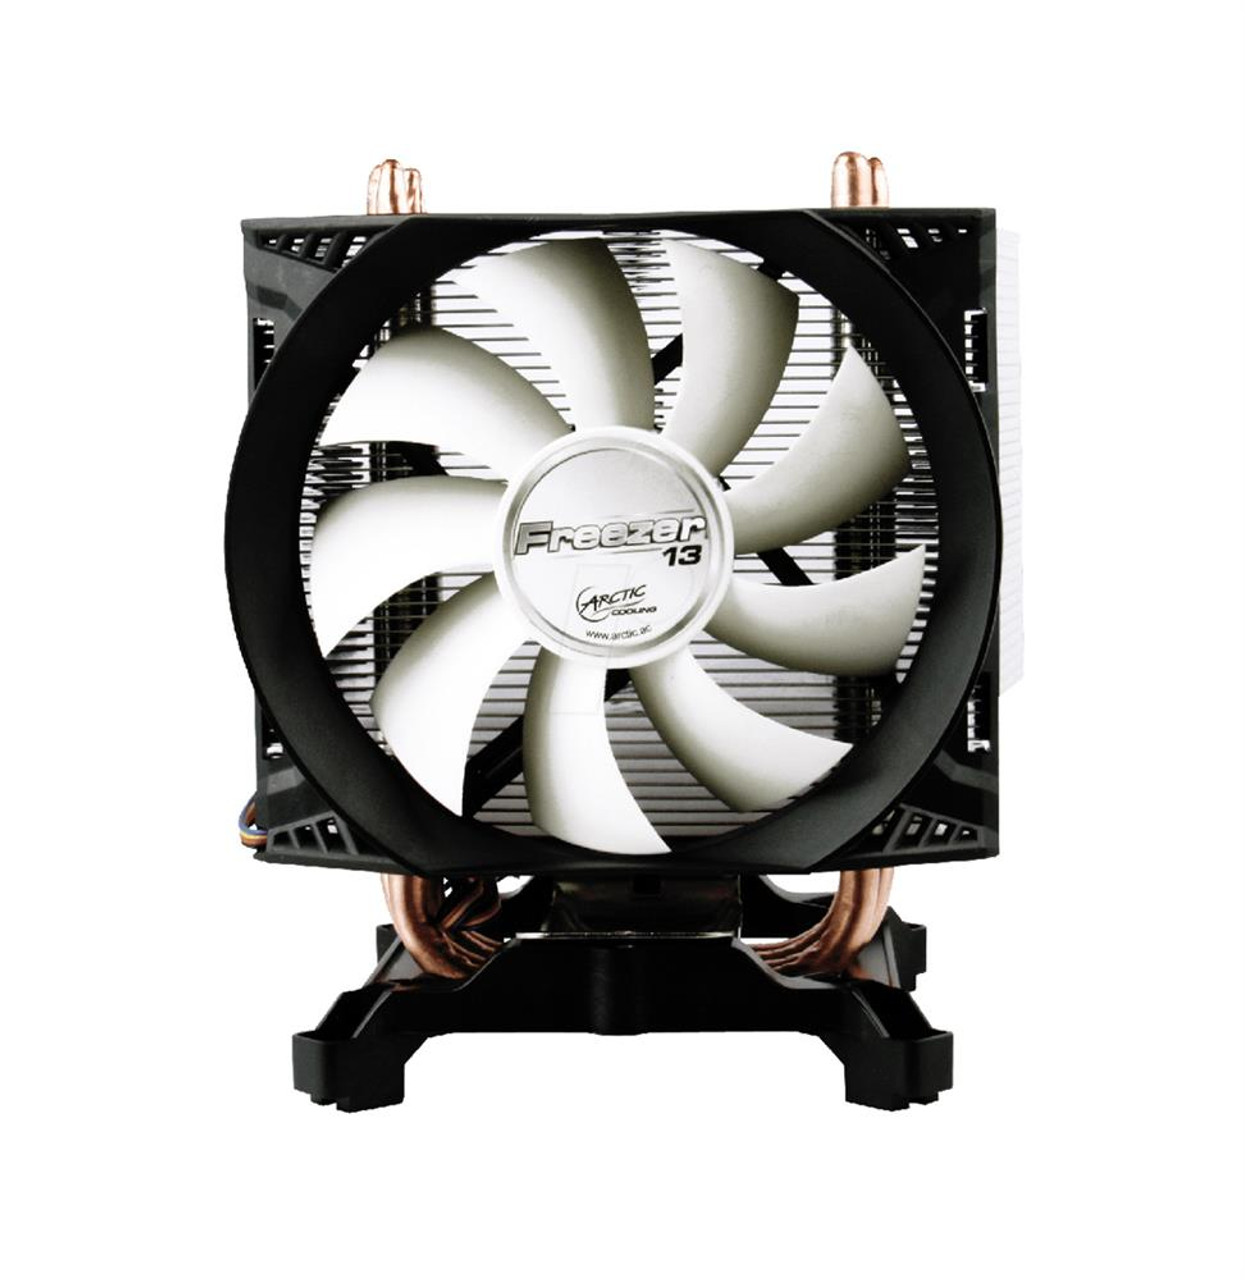 UCACO-FZ130-BL Arctic 200-Watts Cooling Freezer 13 Multicompatible Low Noise CPU Cooling Fan